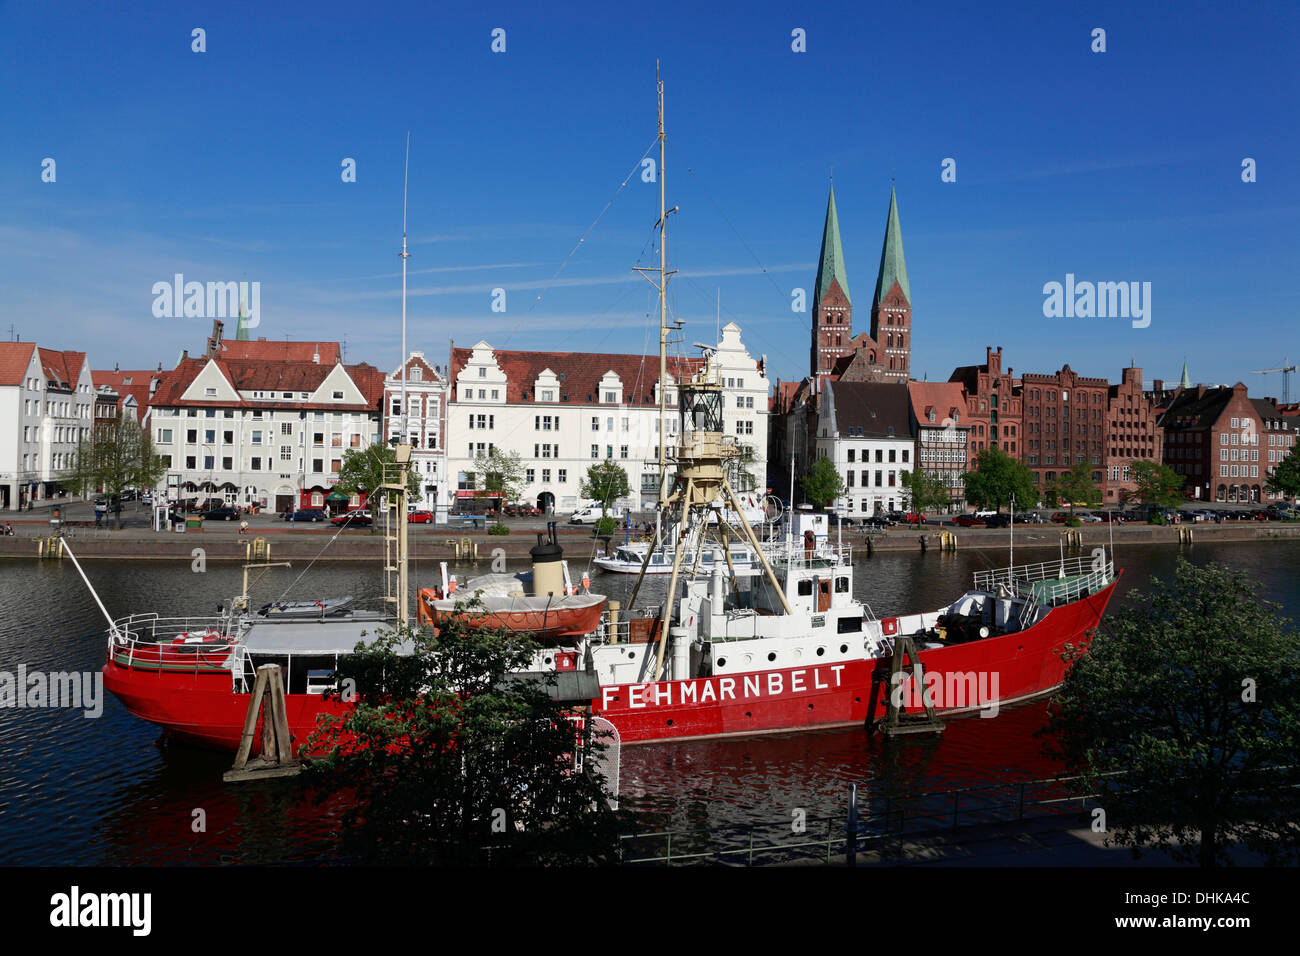 Lightship Fehmarnbelt (museums ship) at Trave river, Hanseatic town Lubeck,  Schleswig-Holstein, Germany Stock Photo